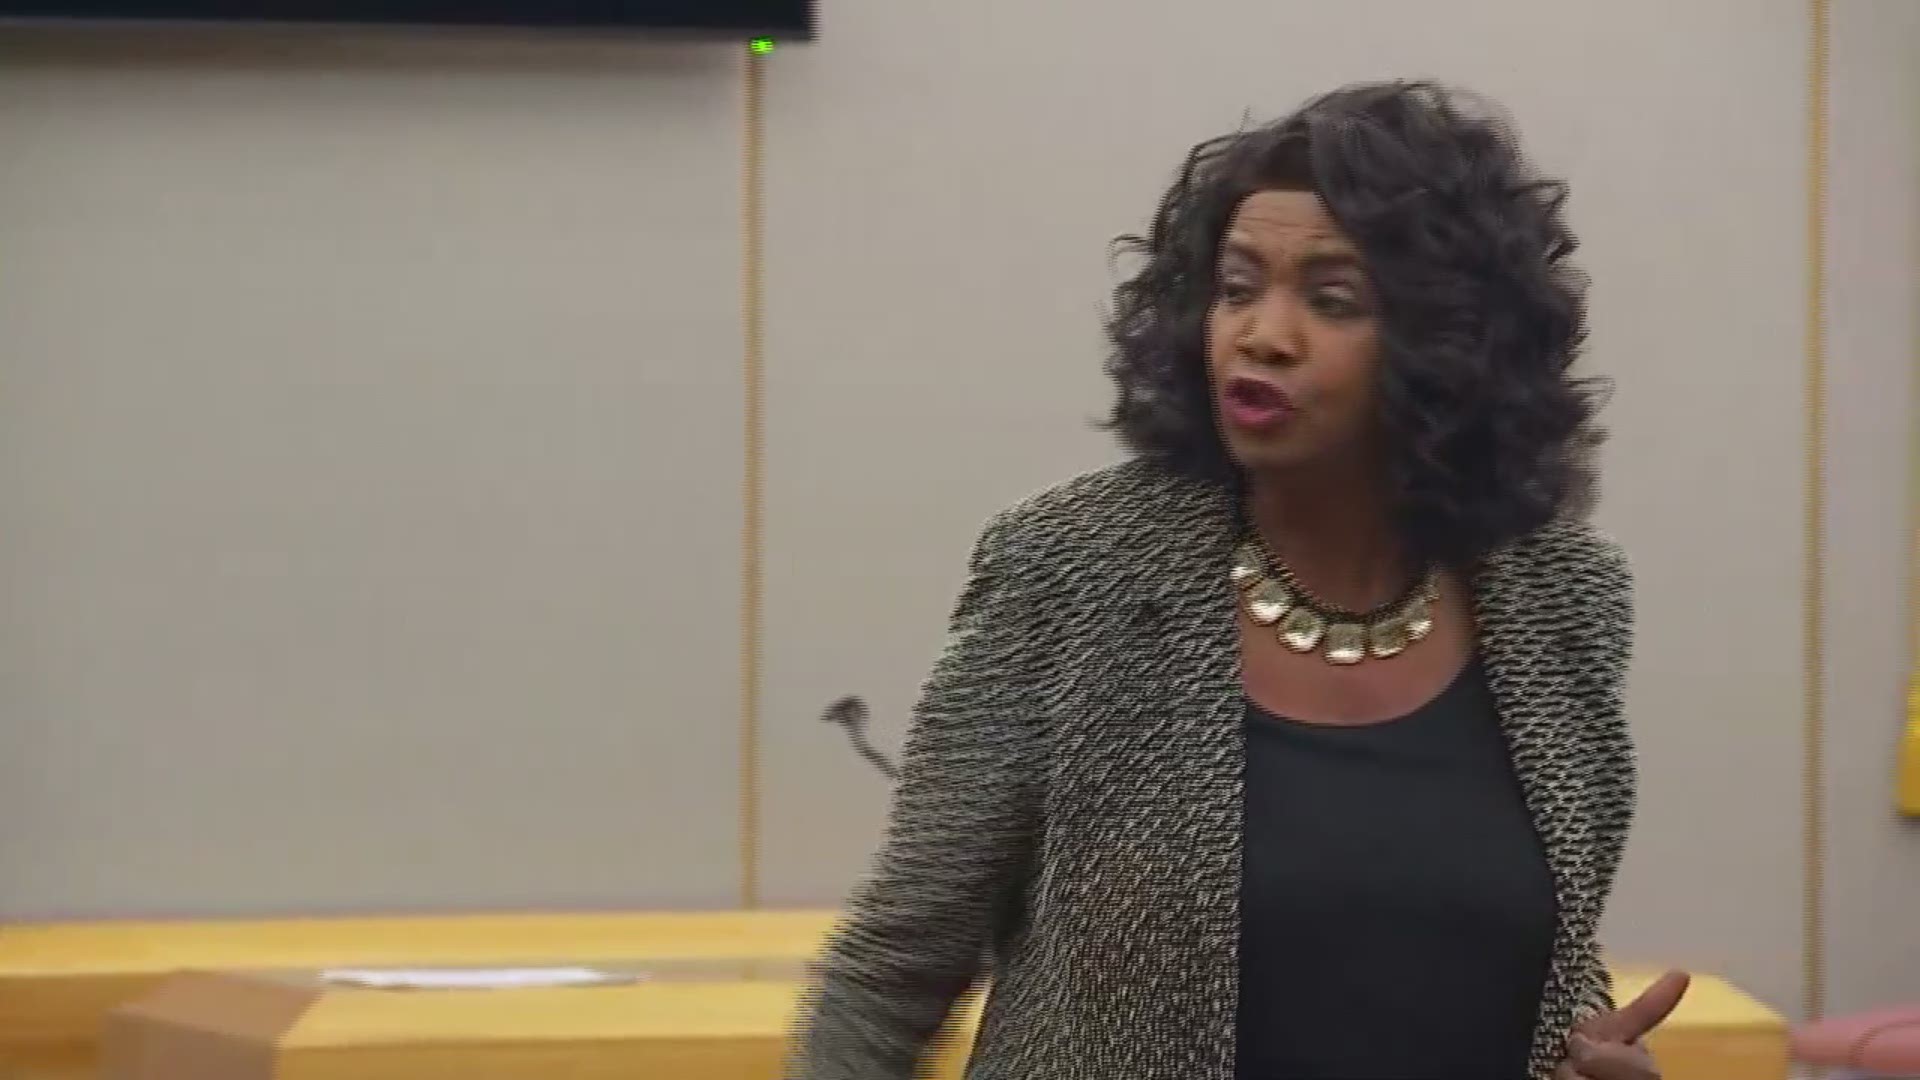 District Attorney Faith Johnson delivered the closing argument Wednesday in the sentencing phase for Roy Oliver, who faces up to life in prison for the murder of Jordan Edwards.